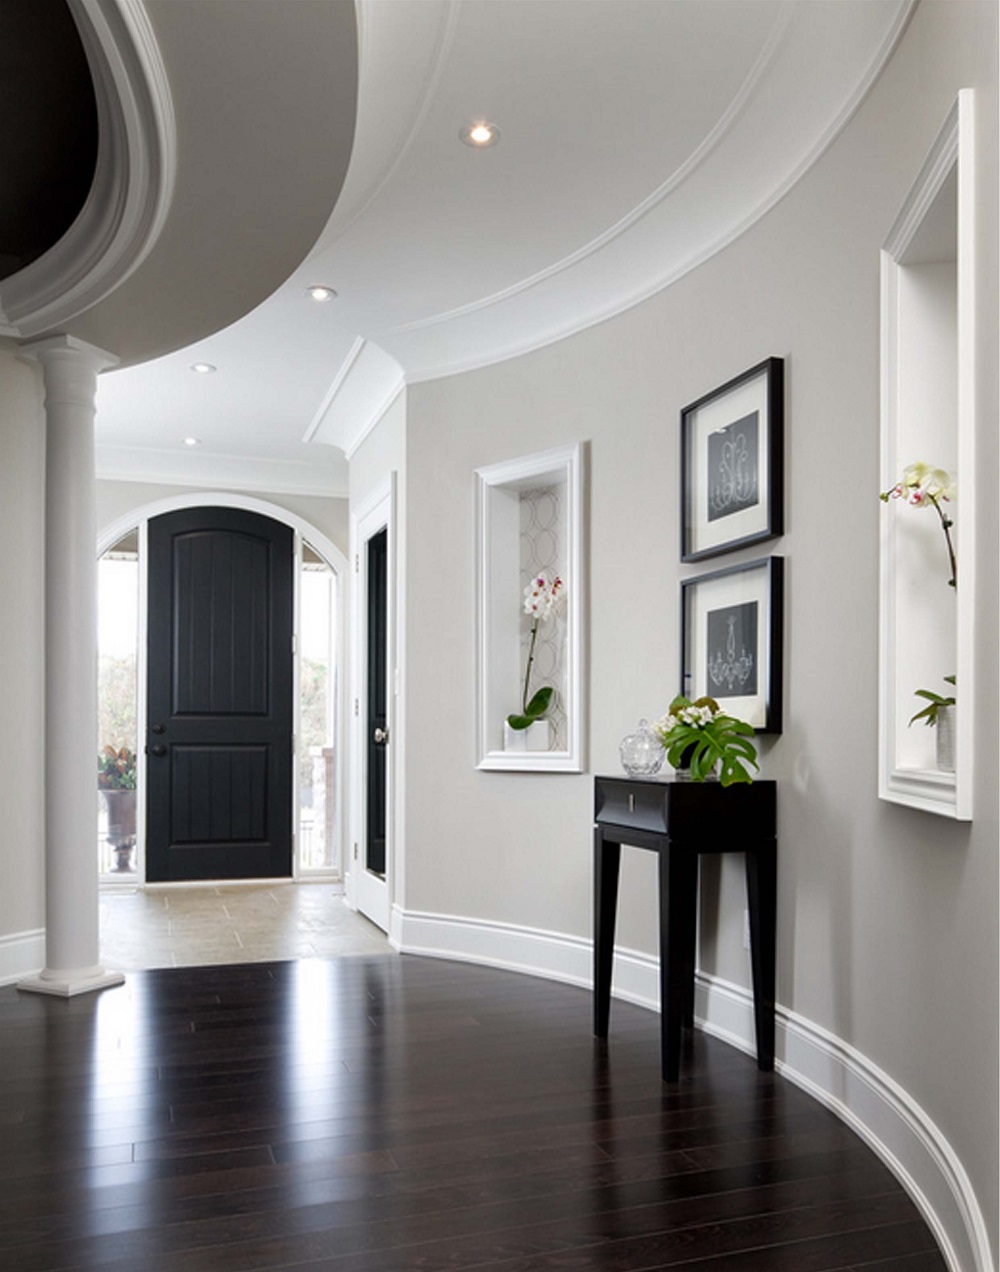 b1 The many baseboard styles that you can use for your walls